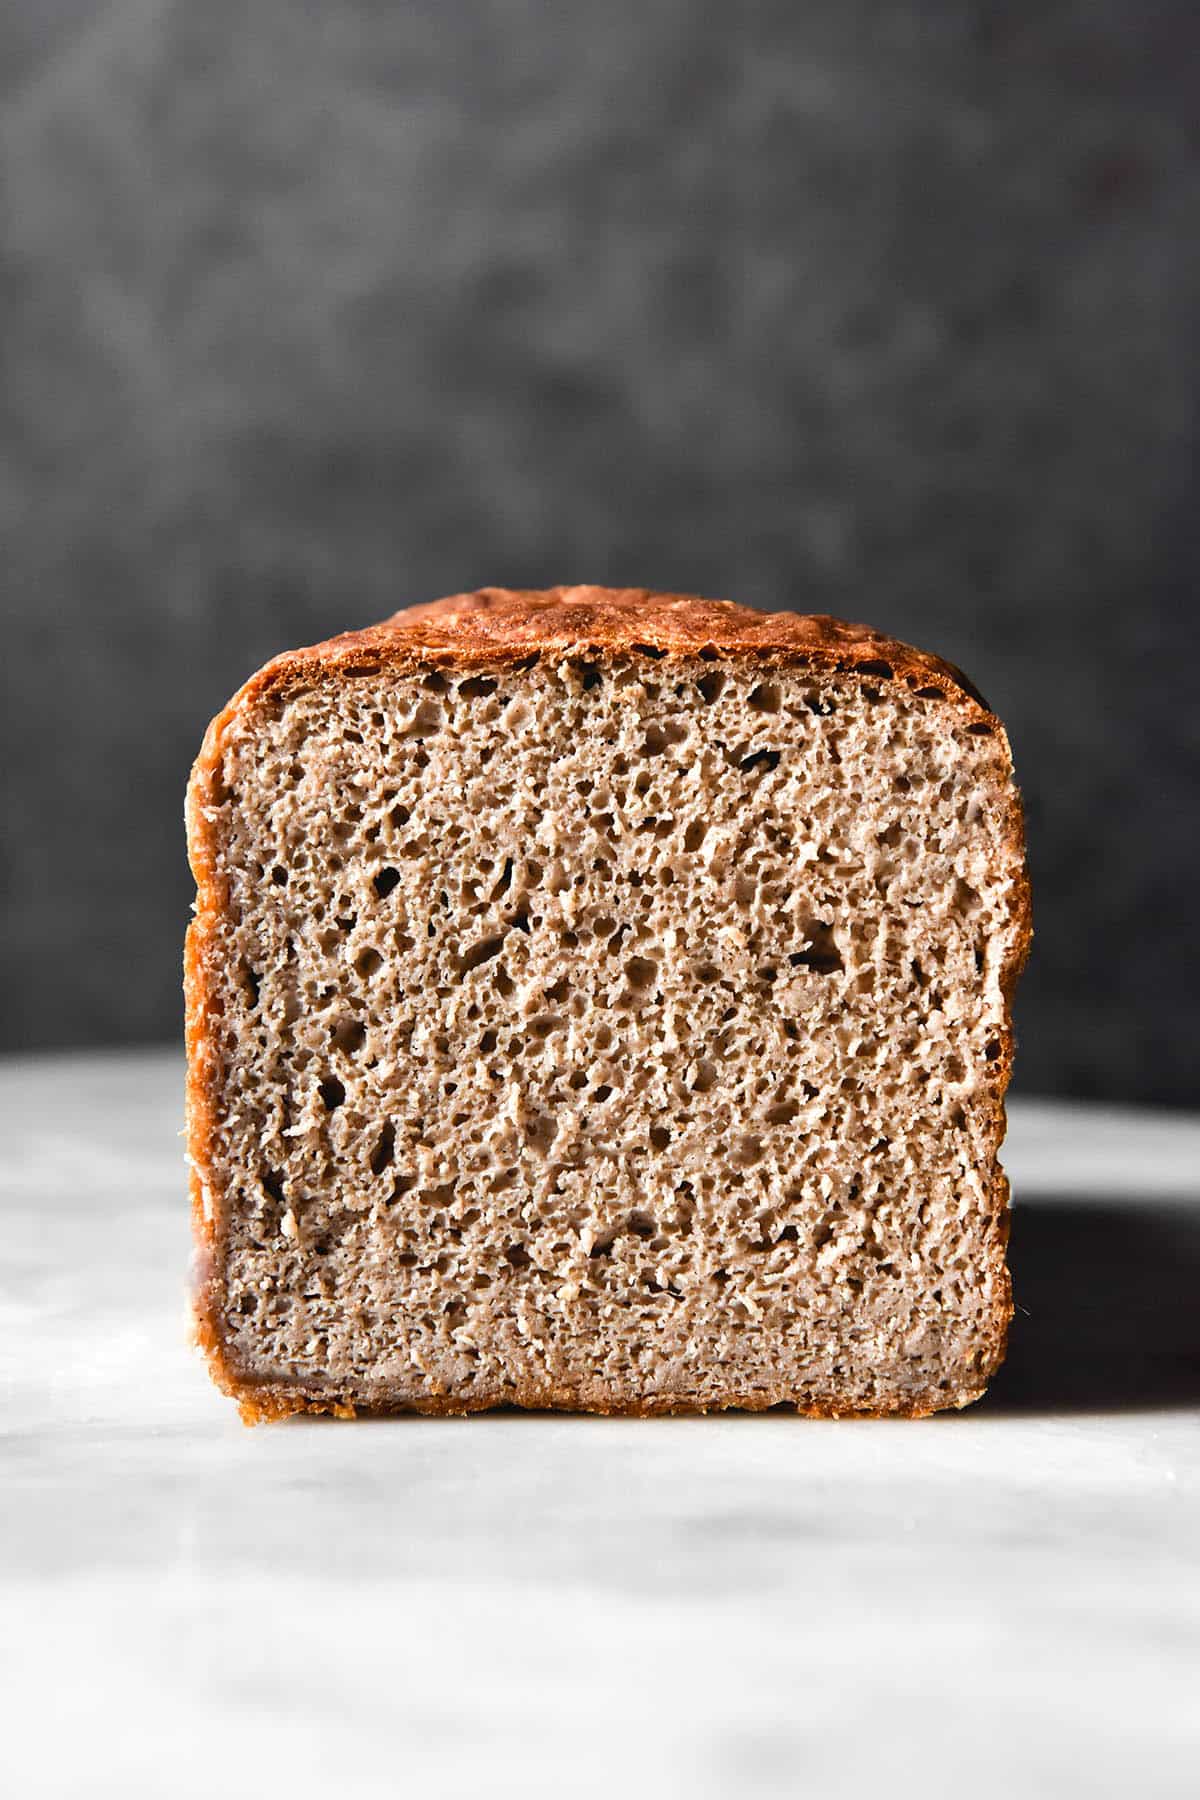 A side on view of the crumb of a gluten free buckwheat bread loaf. The bread sits on a white marble table against a dark backdrop